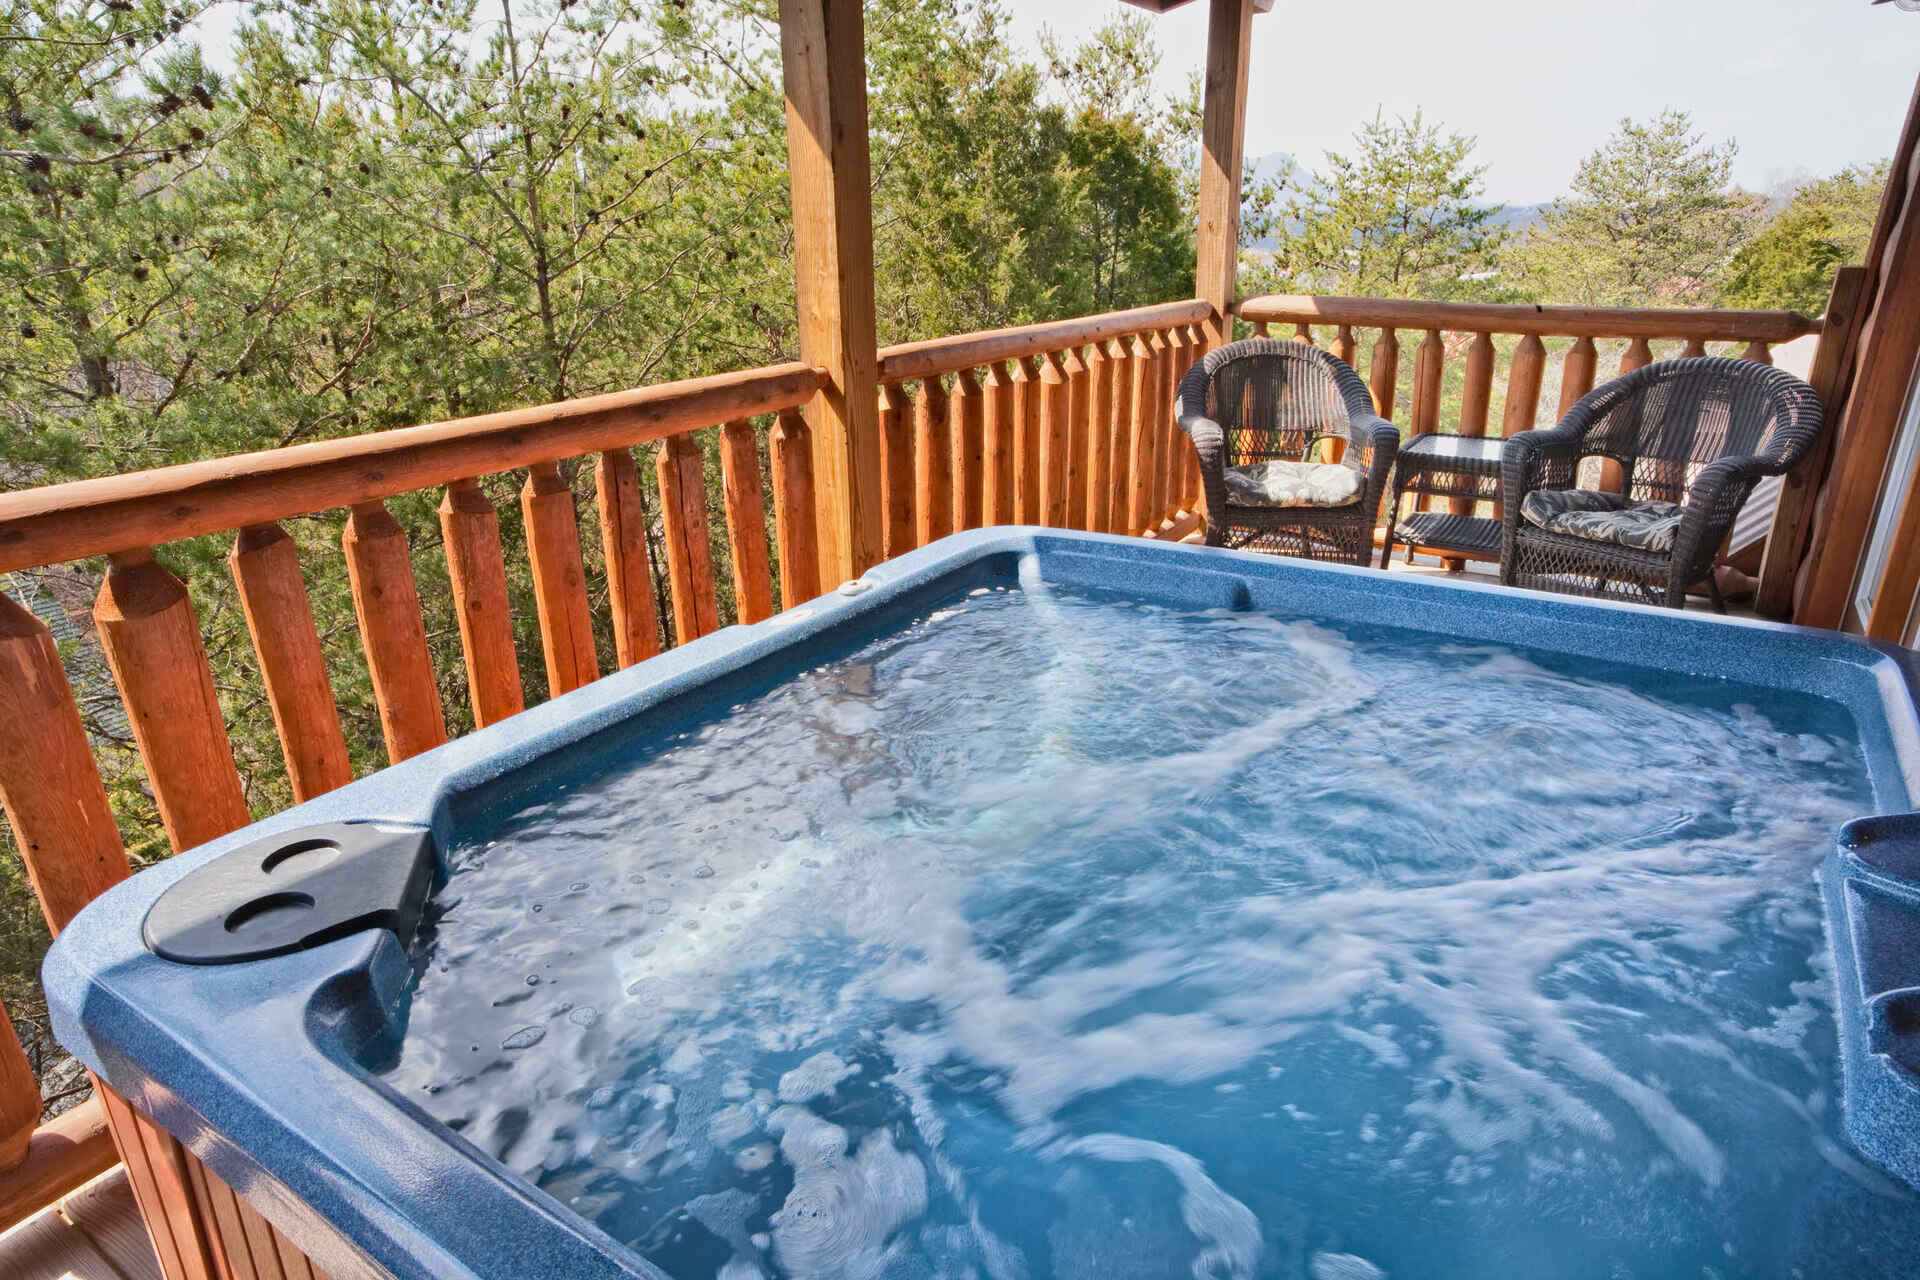 How To Clean Hot Tub With Vinegar